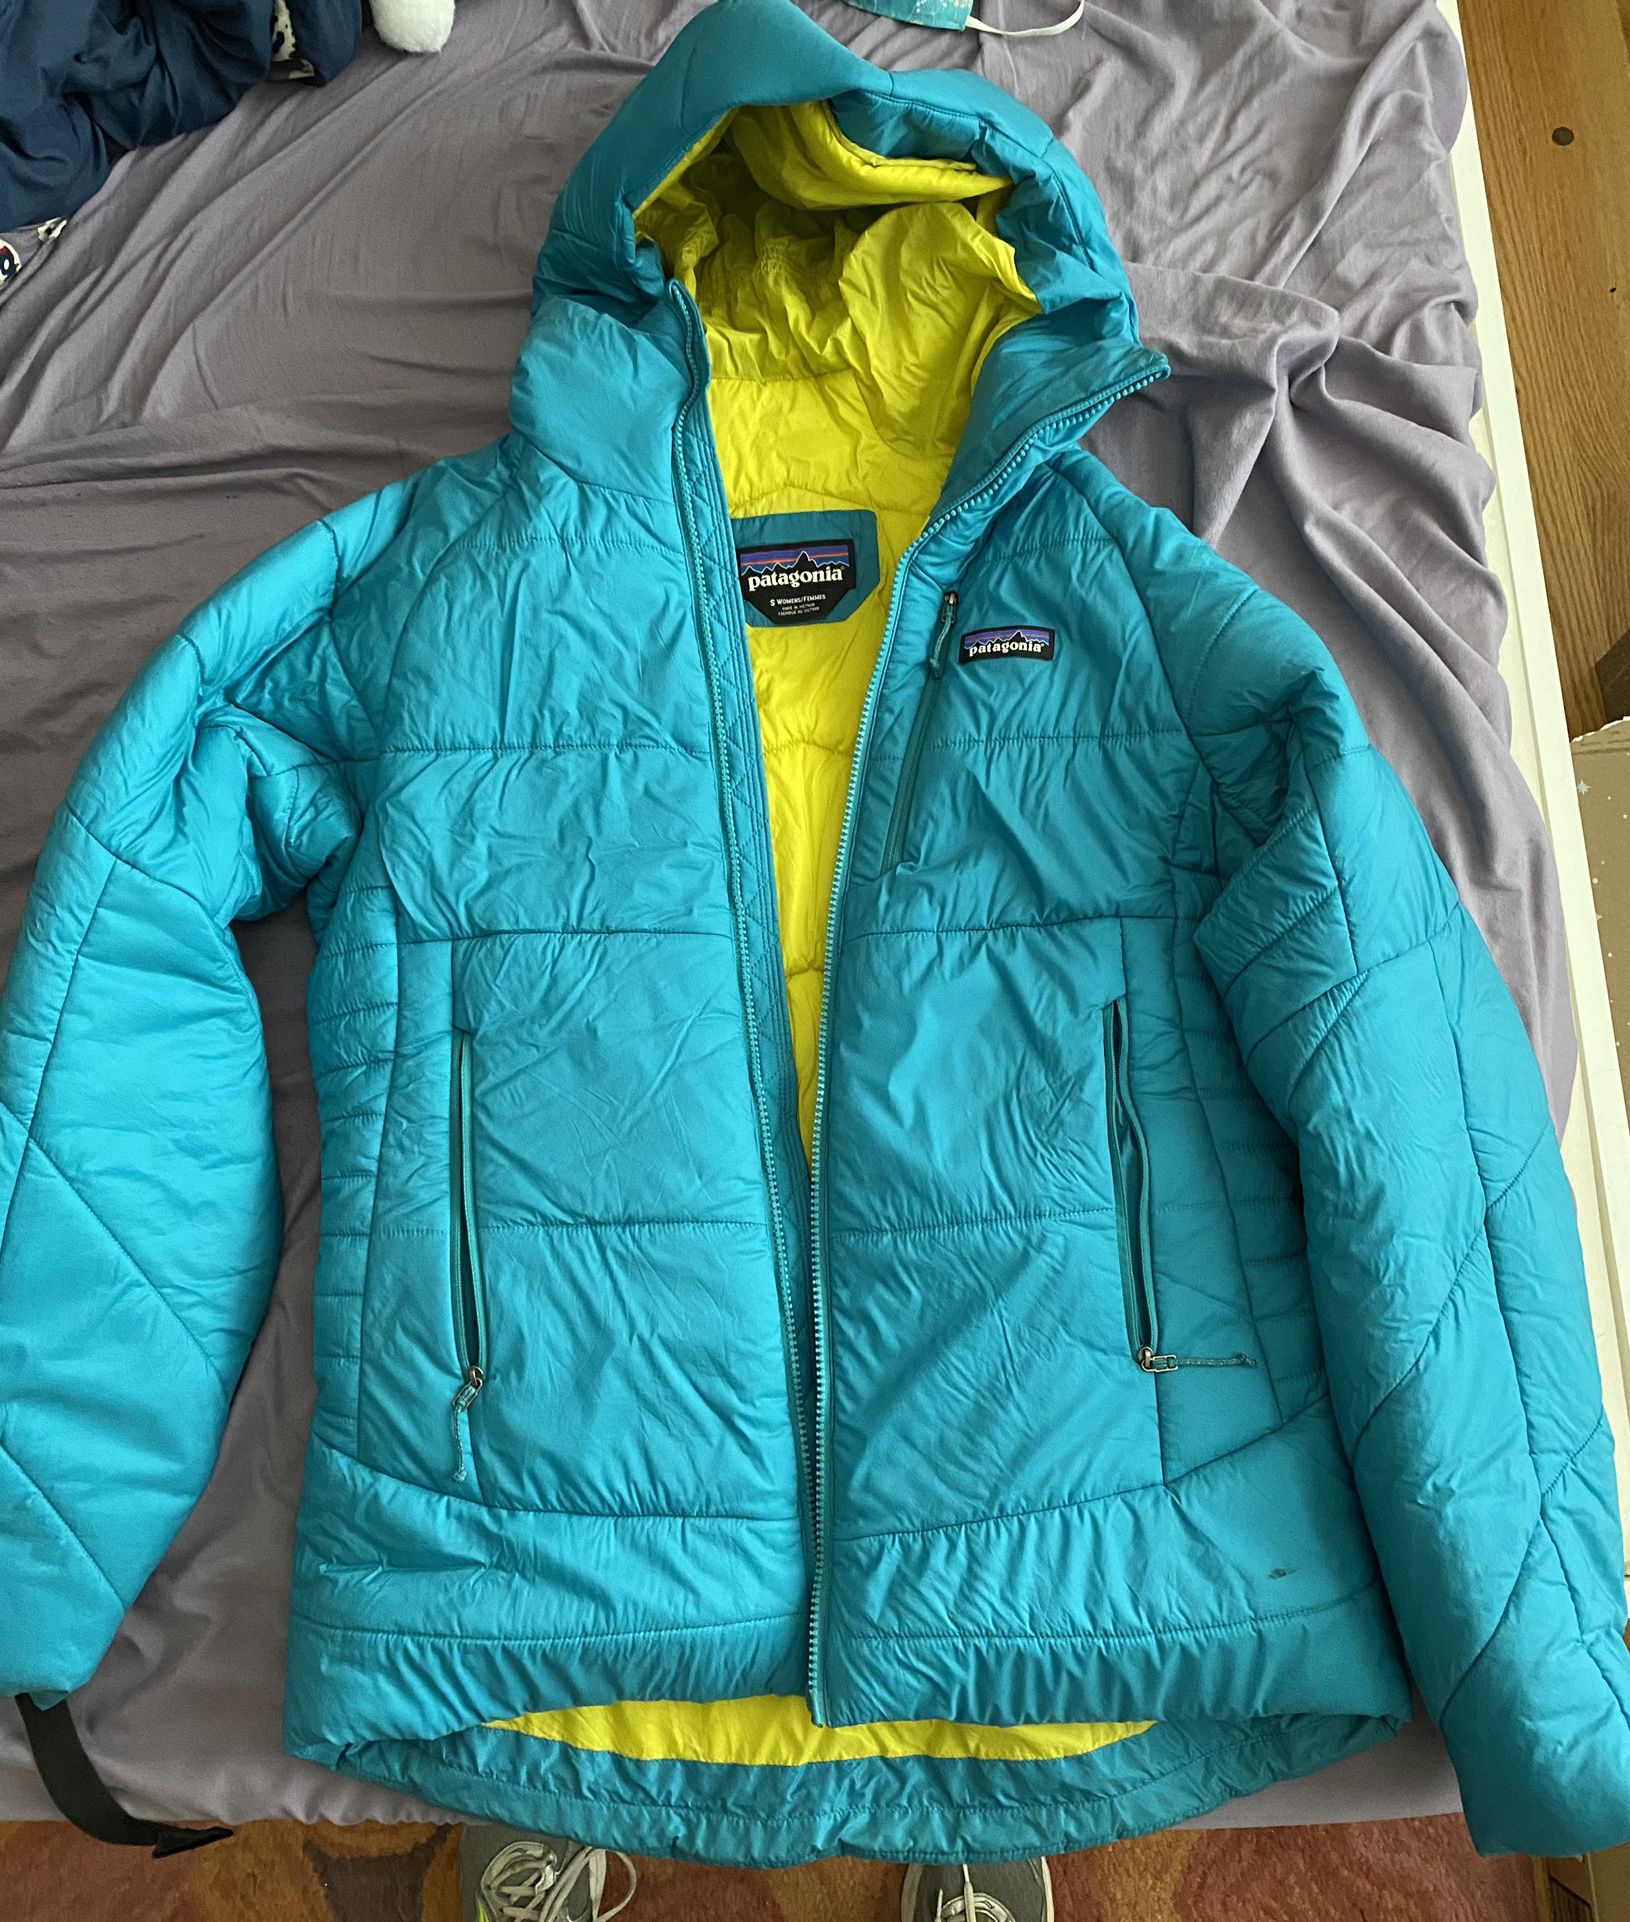 Patagonia Women’s Small Hyper Puff Jacket